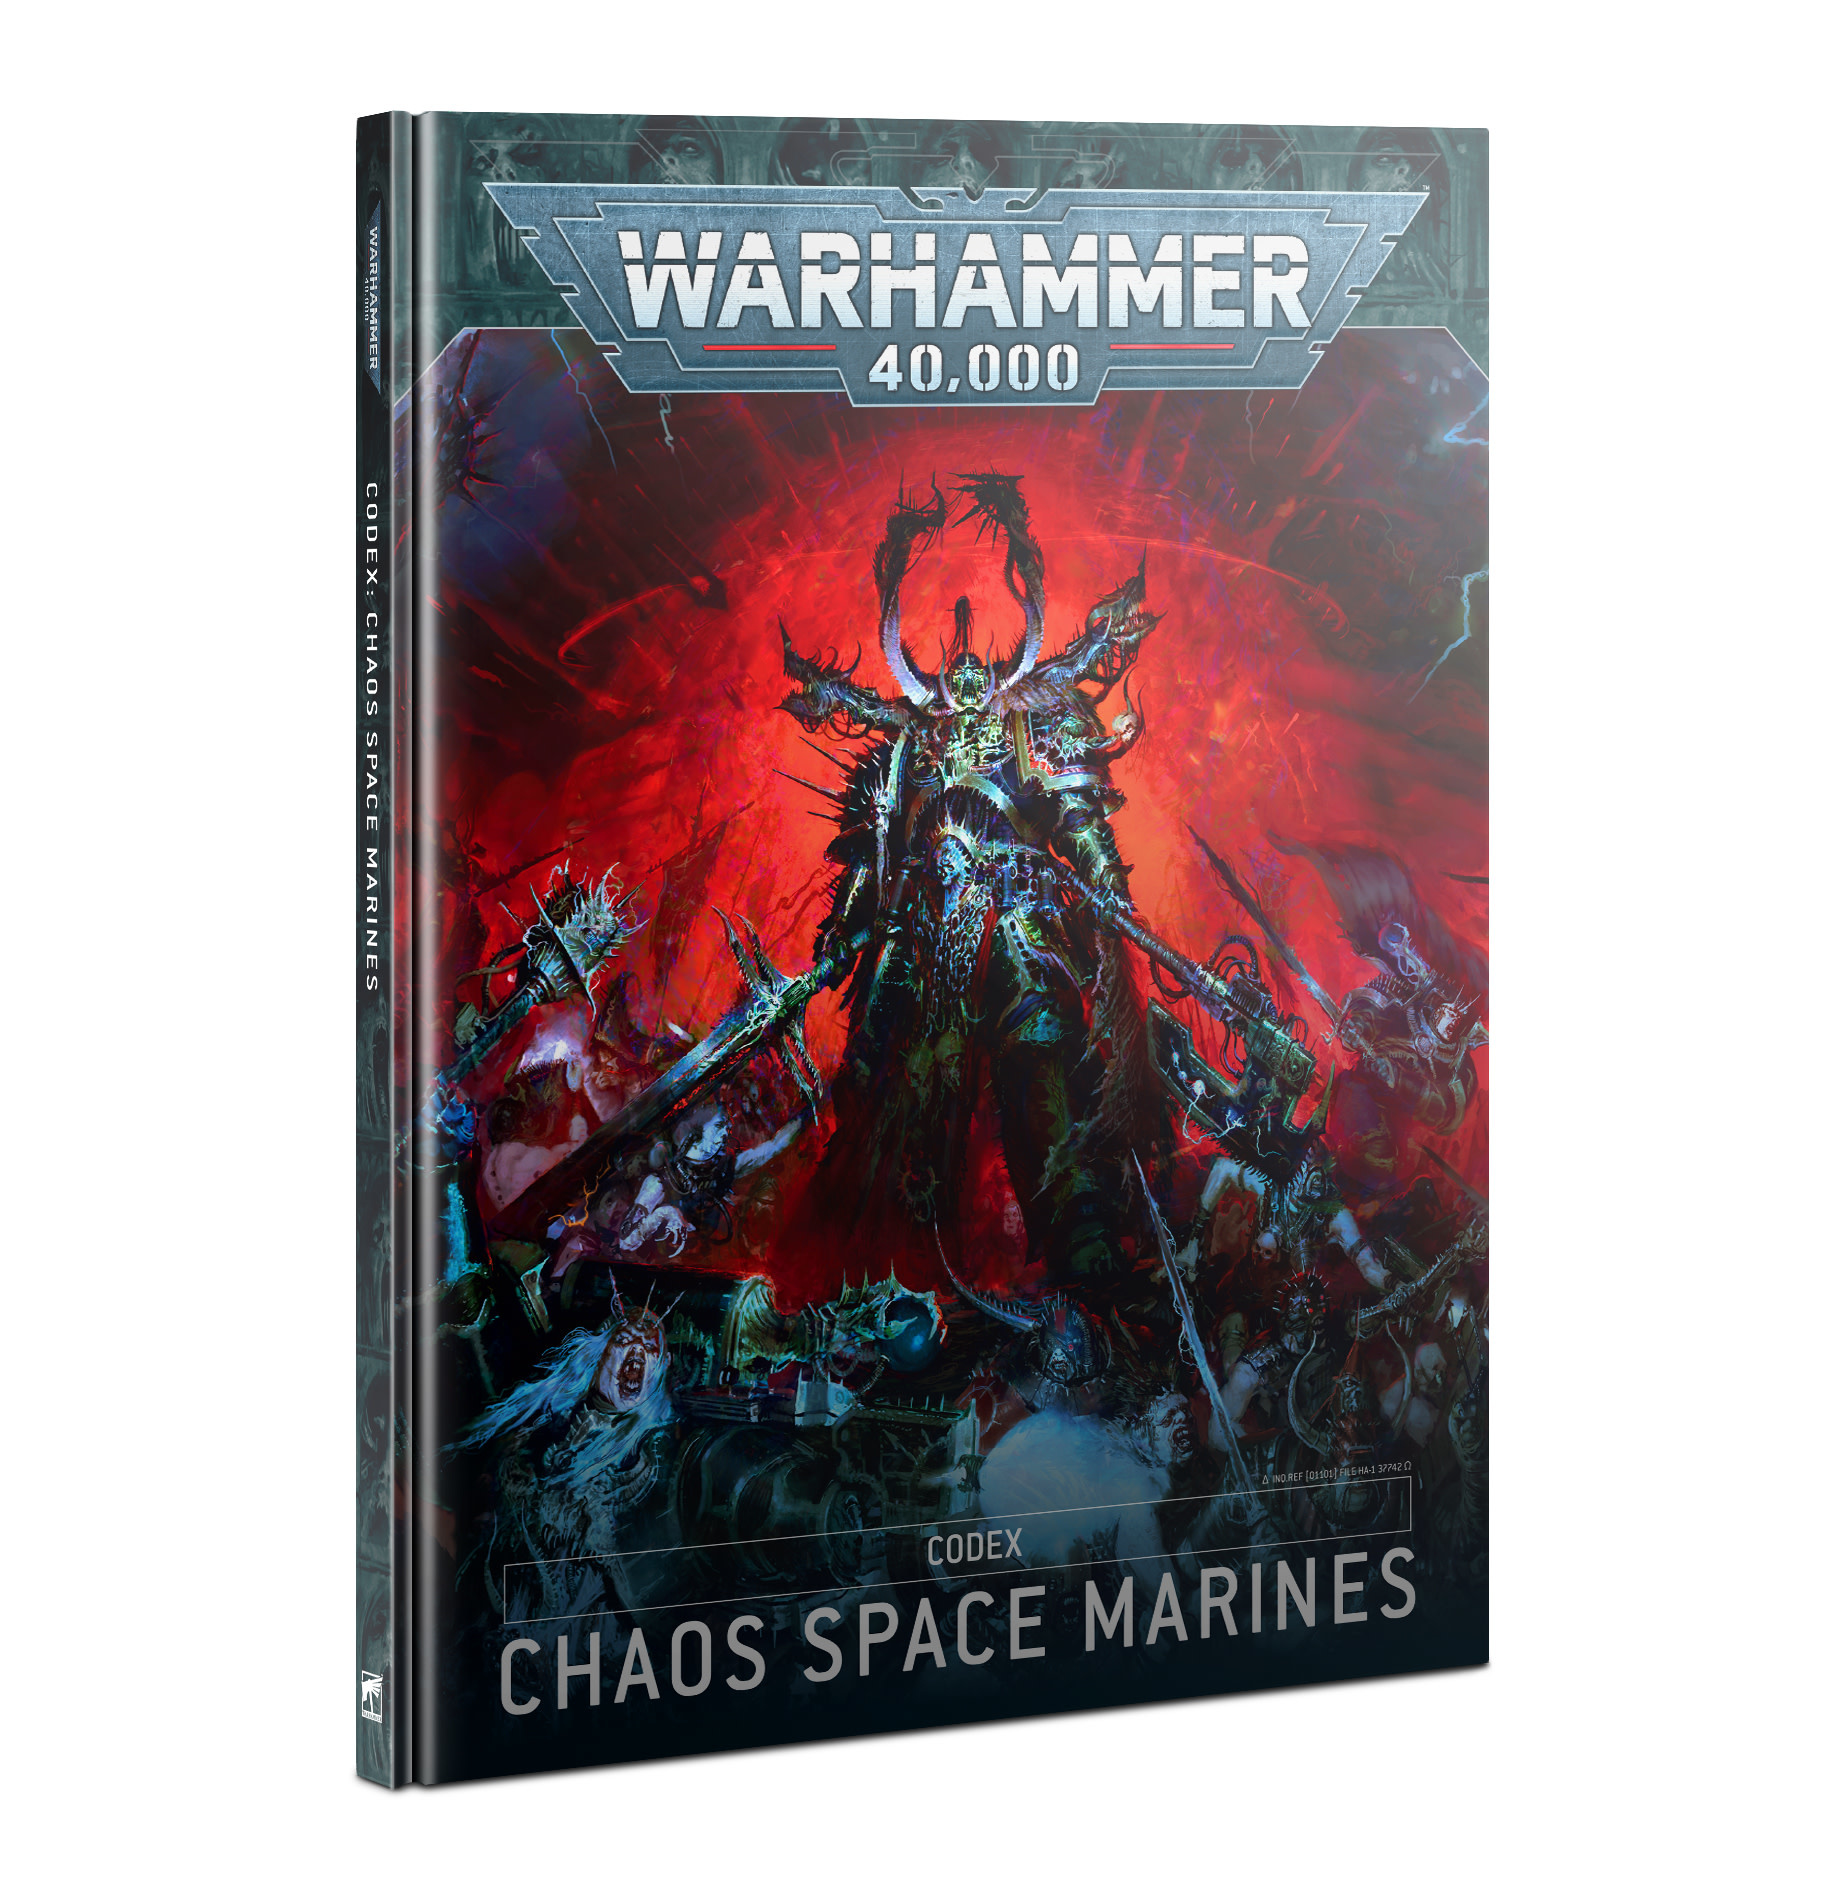 CODEX CHAOS SPACE MARINES - The Art Store/Commercial Art Supply